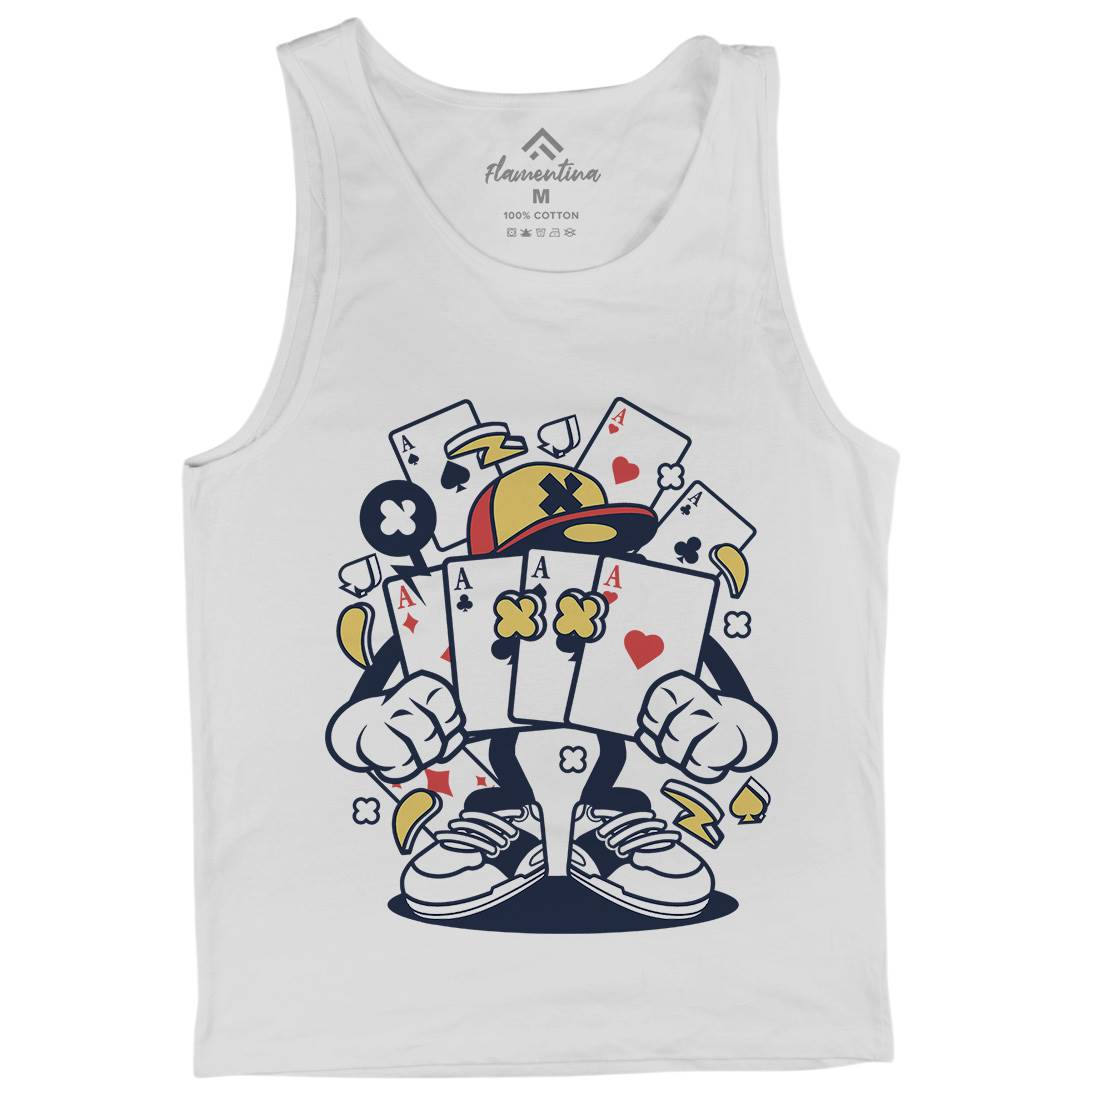 Playing Card Mens Tank Top Vest Sport C193